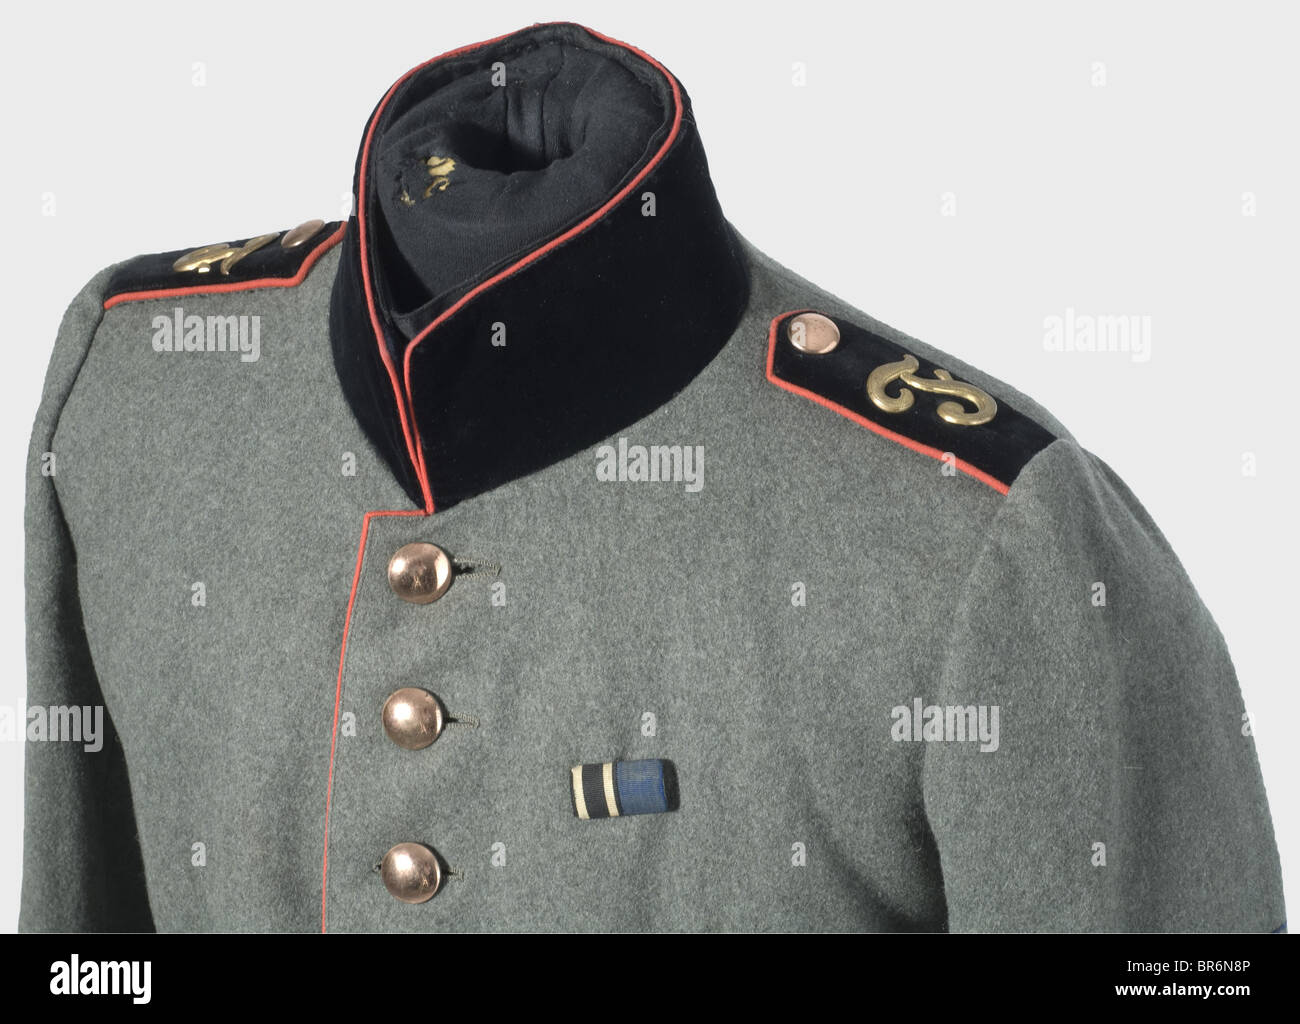 A tunic for an artificer of the provisional Reichswehr., Private purchase,  made of field grey wool cloth, collar, cuffs and shoulder boards (applied  golden "F") of black velvet with red piping, golden